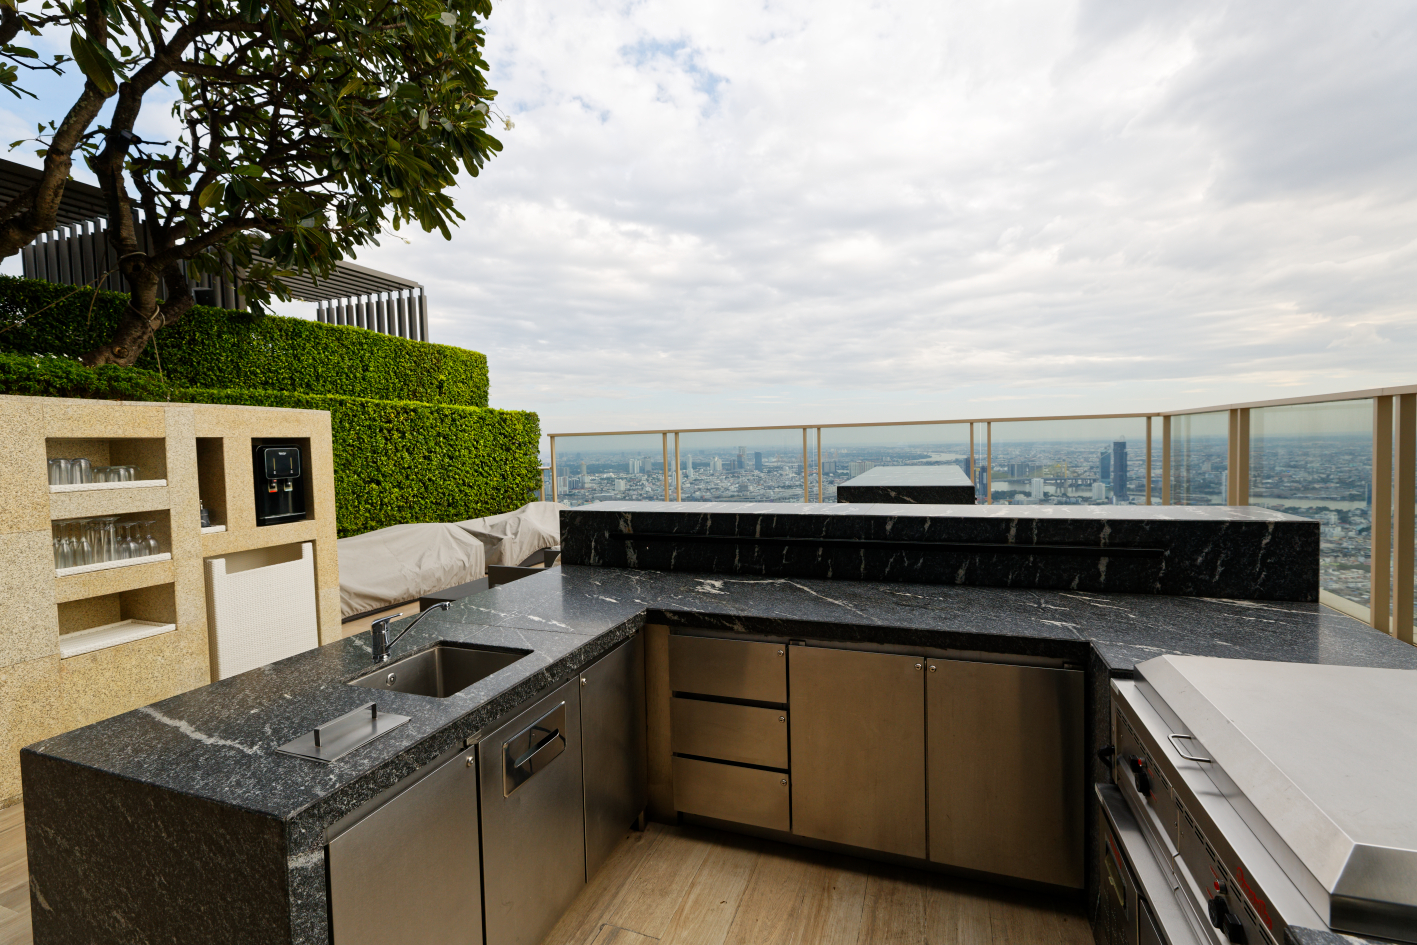 3 Bedrooms, 3 Bathrooms 194sqm 51st Flr at Four Seasons Private Residences For Sale 110MB